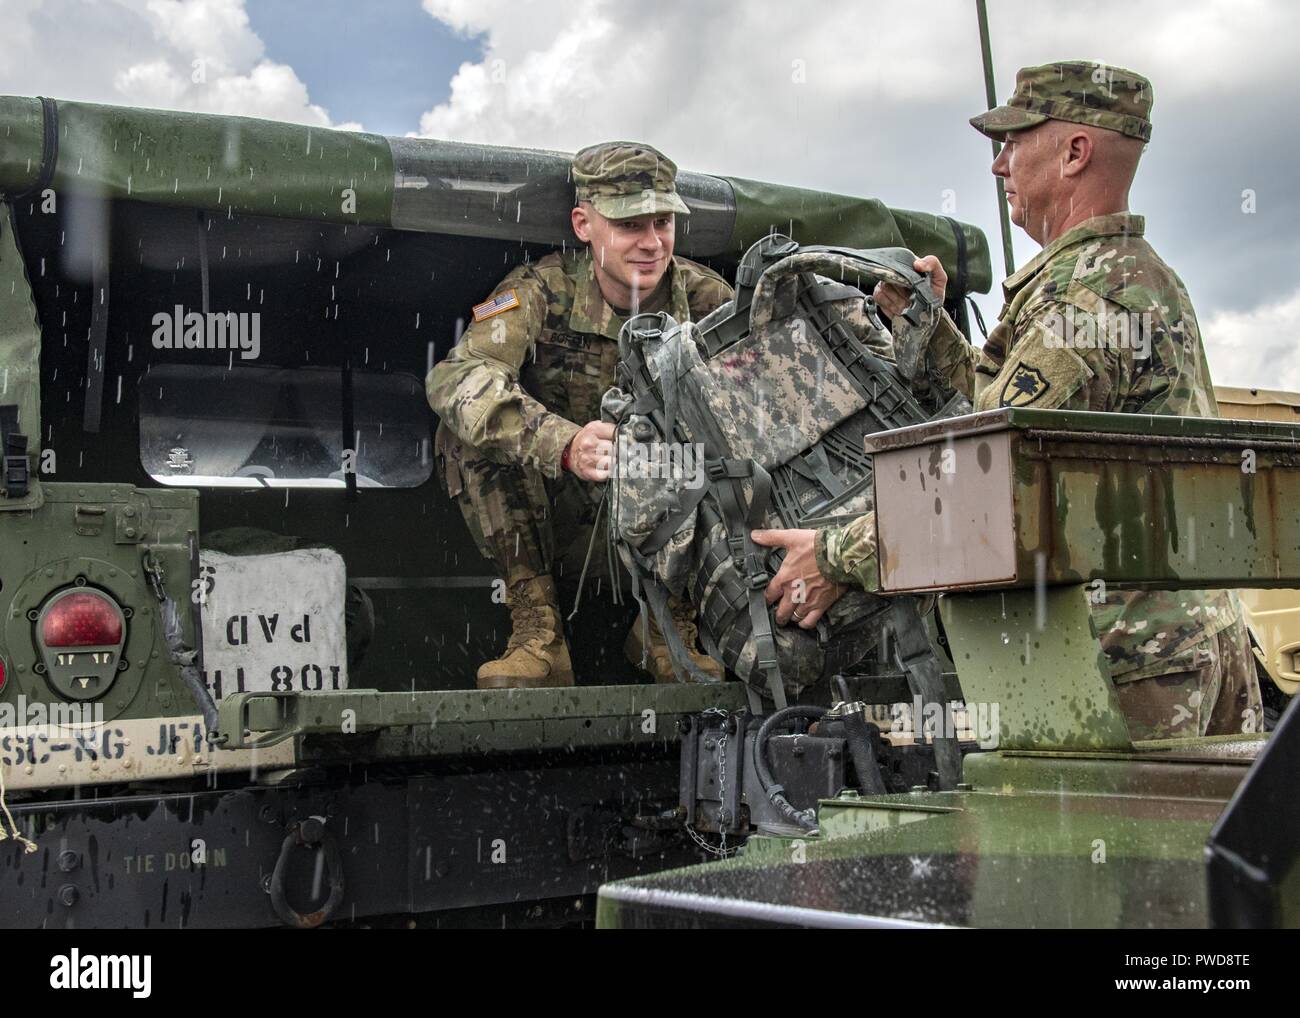 South Carolina National Guard Soldiers from the 108th Public Affairs Detachment in Eastover, S.C. load gear into a Humvee in preparation to support partnered civilian agencies and safeguard the citizens of the state in advance of Hurricane Florence, September 9, 2018, September 9, 2018. Approximately 1, 600 Soldiers and Airmen have been mobilized to prepare, respond and participate in recovery efforts as forecasters project Hurricane Florence will increase in strength with potential to be a Category 4 storm and a projected path to make landfall near the Carolinas and east coast. (U.S. Army Nat Stock Photo